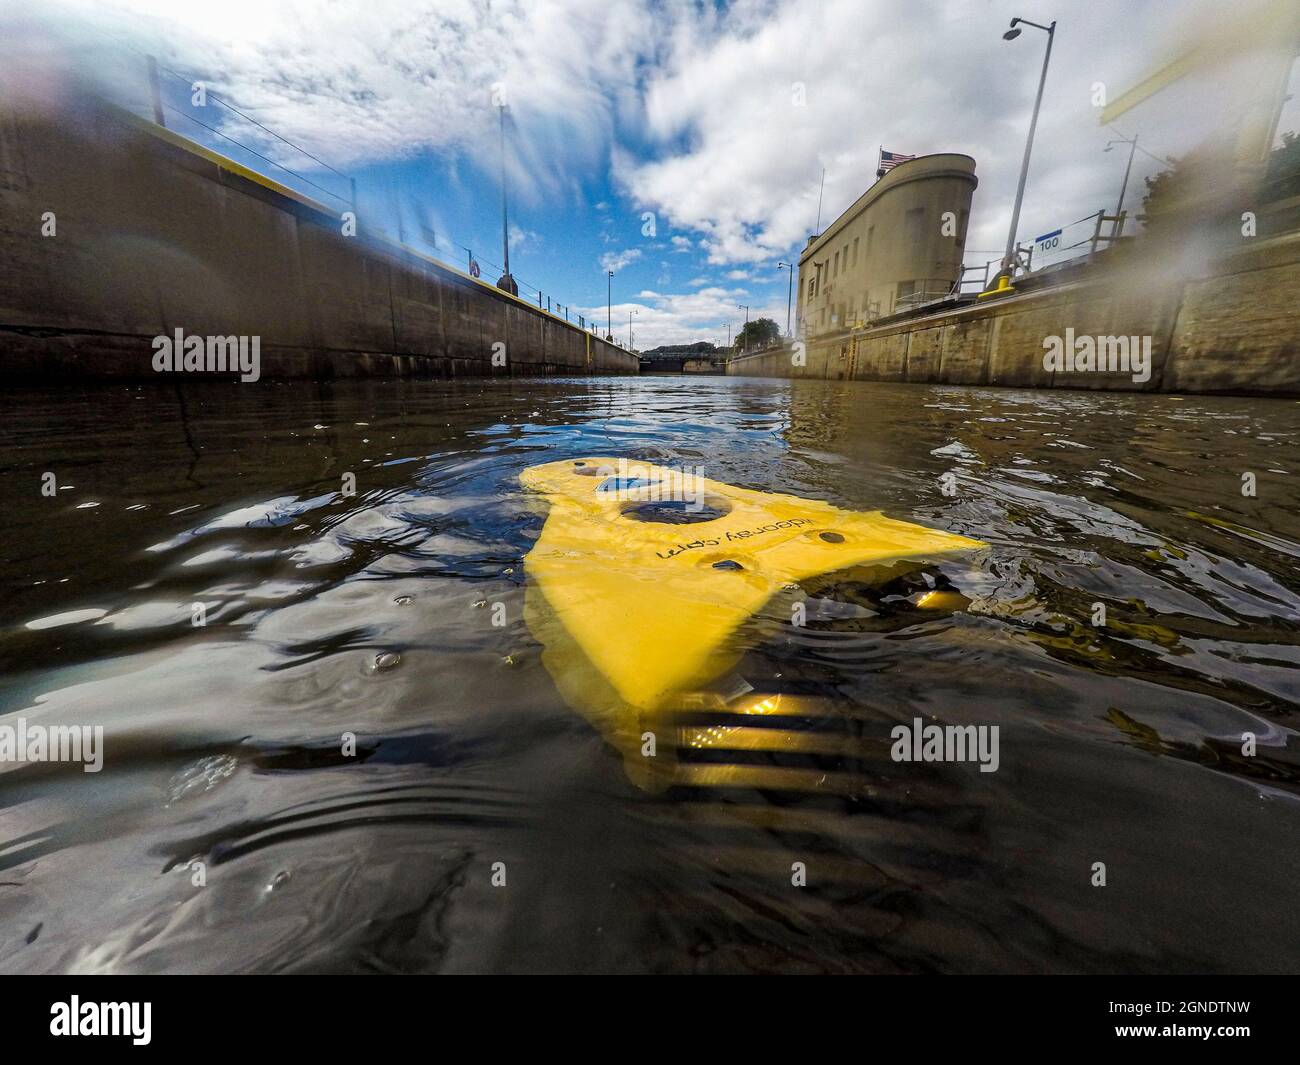 Members of the U.S. Army Corps of Engineers Pittsburgh District train on the VideoRay PRO 5, an underwater remote operated vehicle (ROV), at a lock and dam facility on the Allegheny River in Natrona, Pennsylvania, Sept. 22, 2021. This ROV model is new to the Pittsburgh District, equipped with a high-definition video and photo camera, a multibeam sonar, a claw that can rotate and grab objects, and a motor that is twice as powerful as the previous version to pilot through stronger currents. (U.S. Army Corps of Engineers photo by Chris Smith) Stock Photo